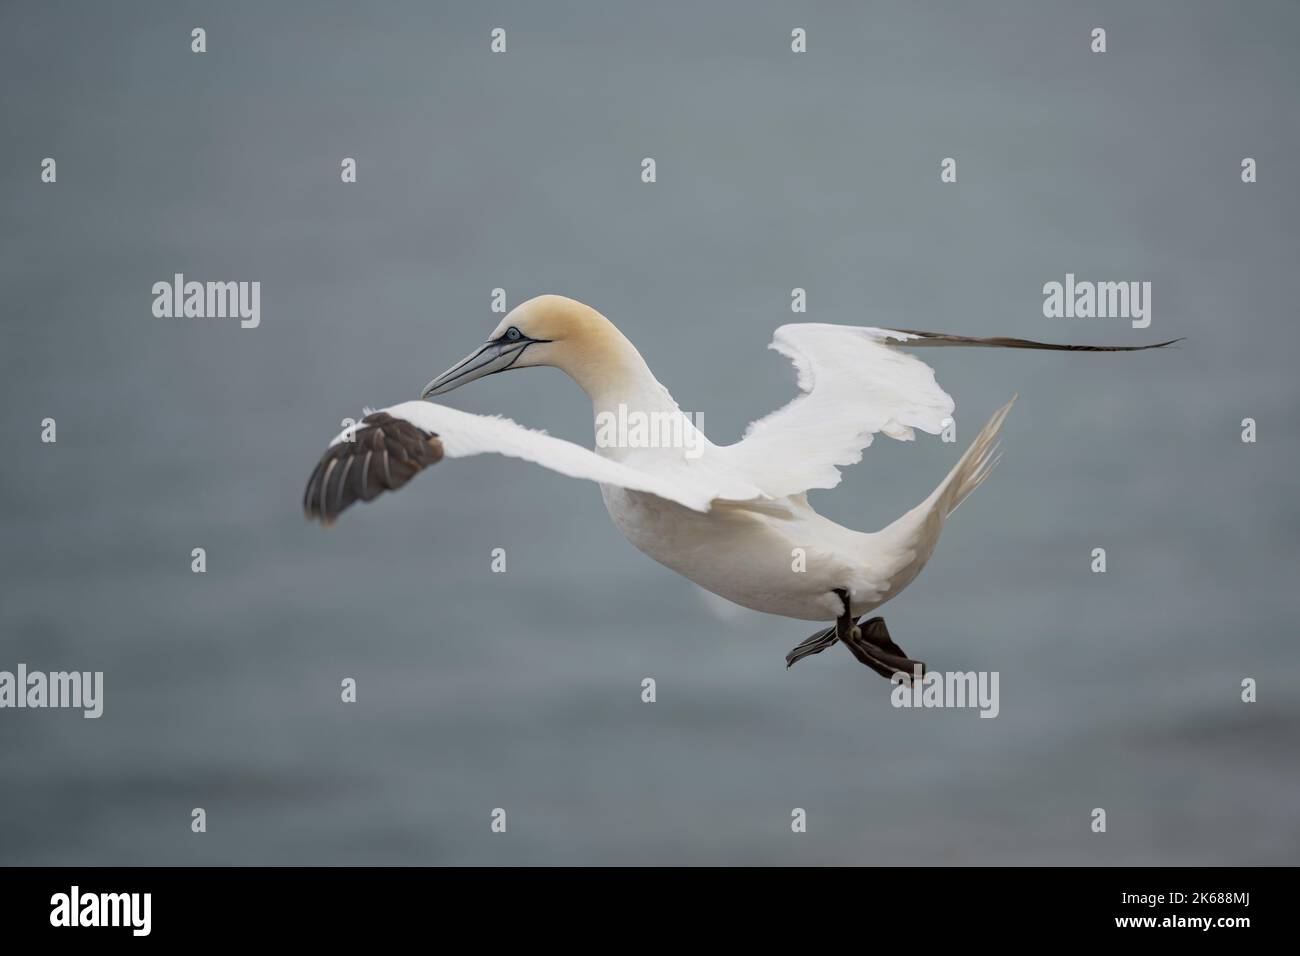 Northern Gannet Morus bassanus, an adult plumaged bird in flight using the updrafts of high winds next to a cliff, Yorkshire, UK, August Stock Photo